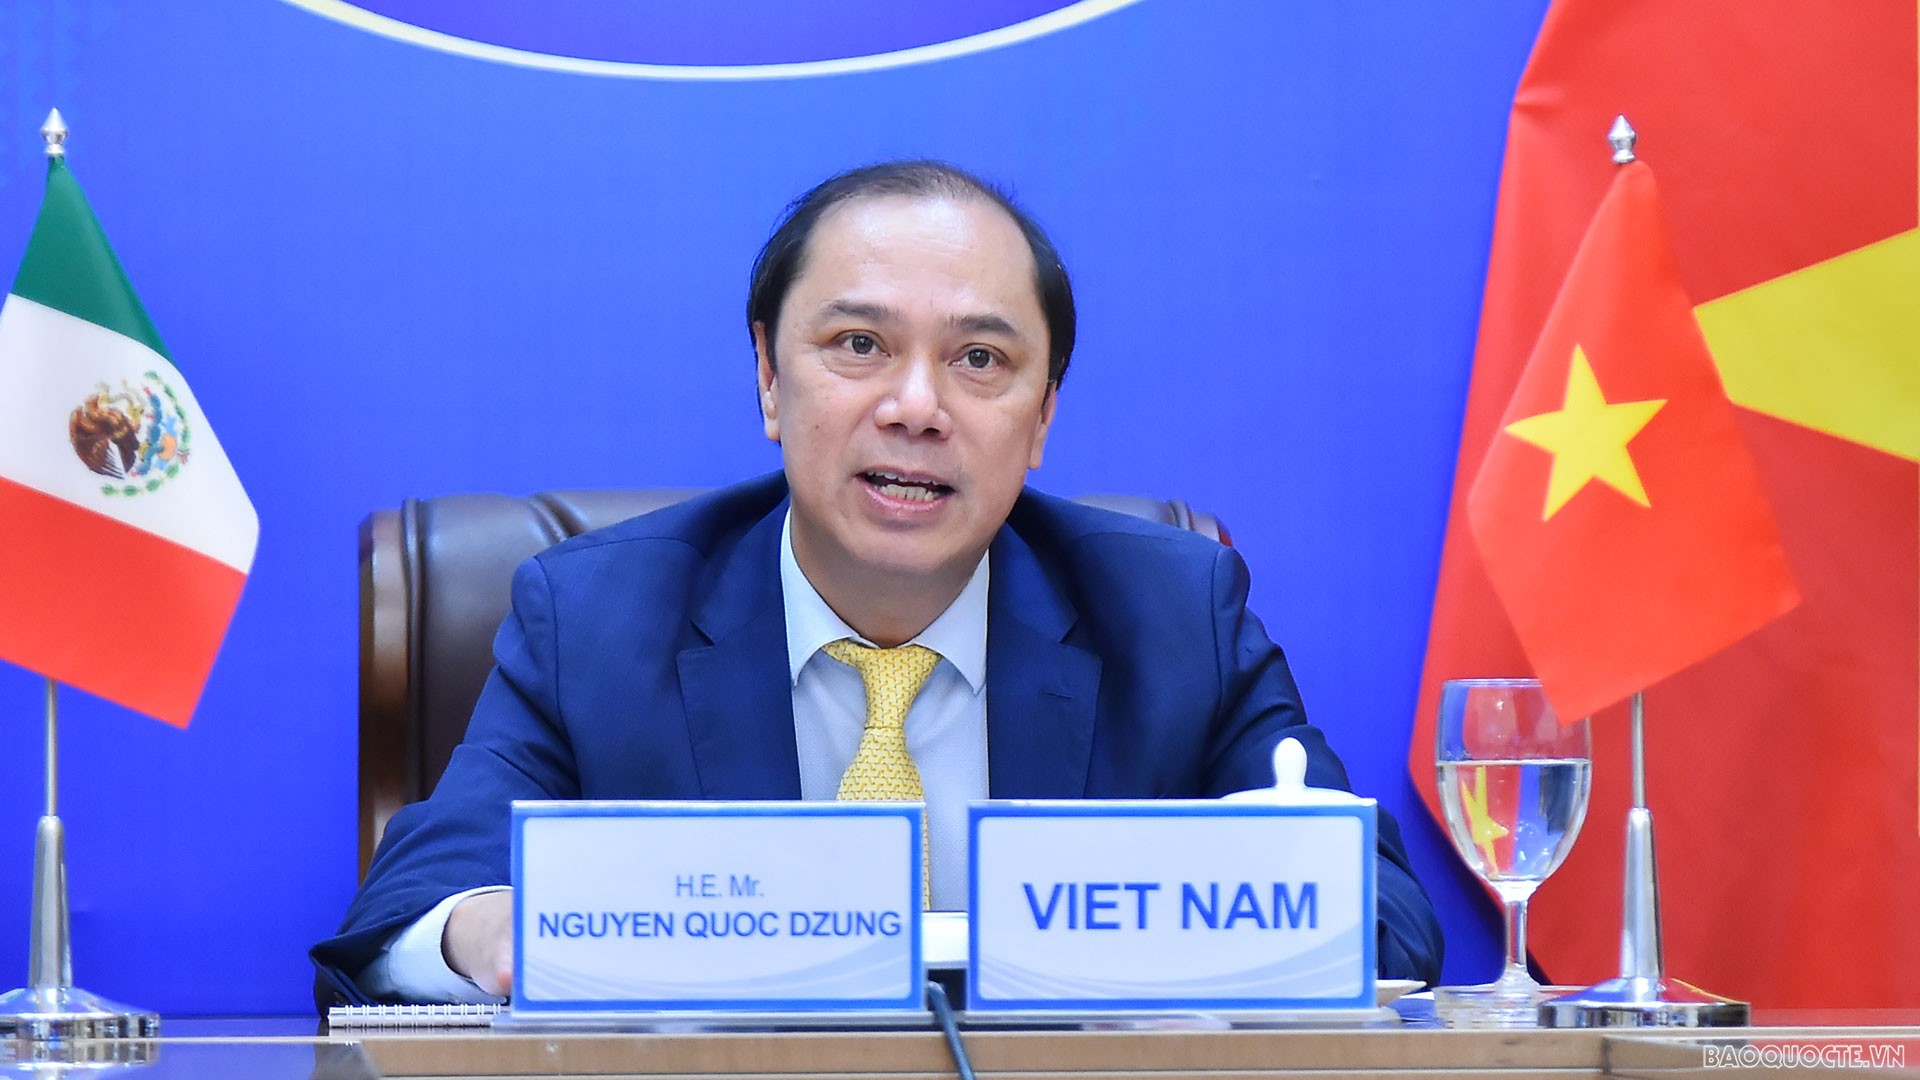 Political consultation held to reinforce Vietnam - Mexico relations